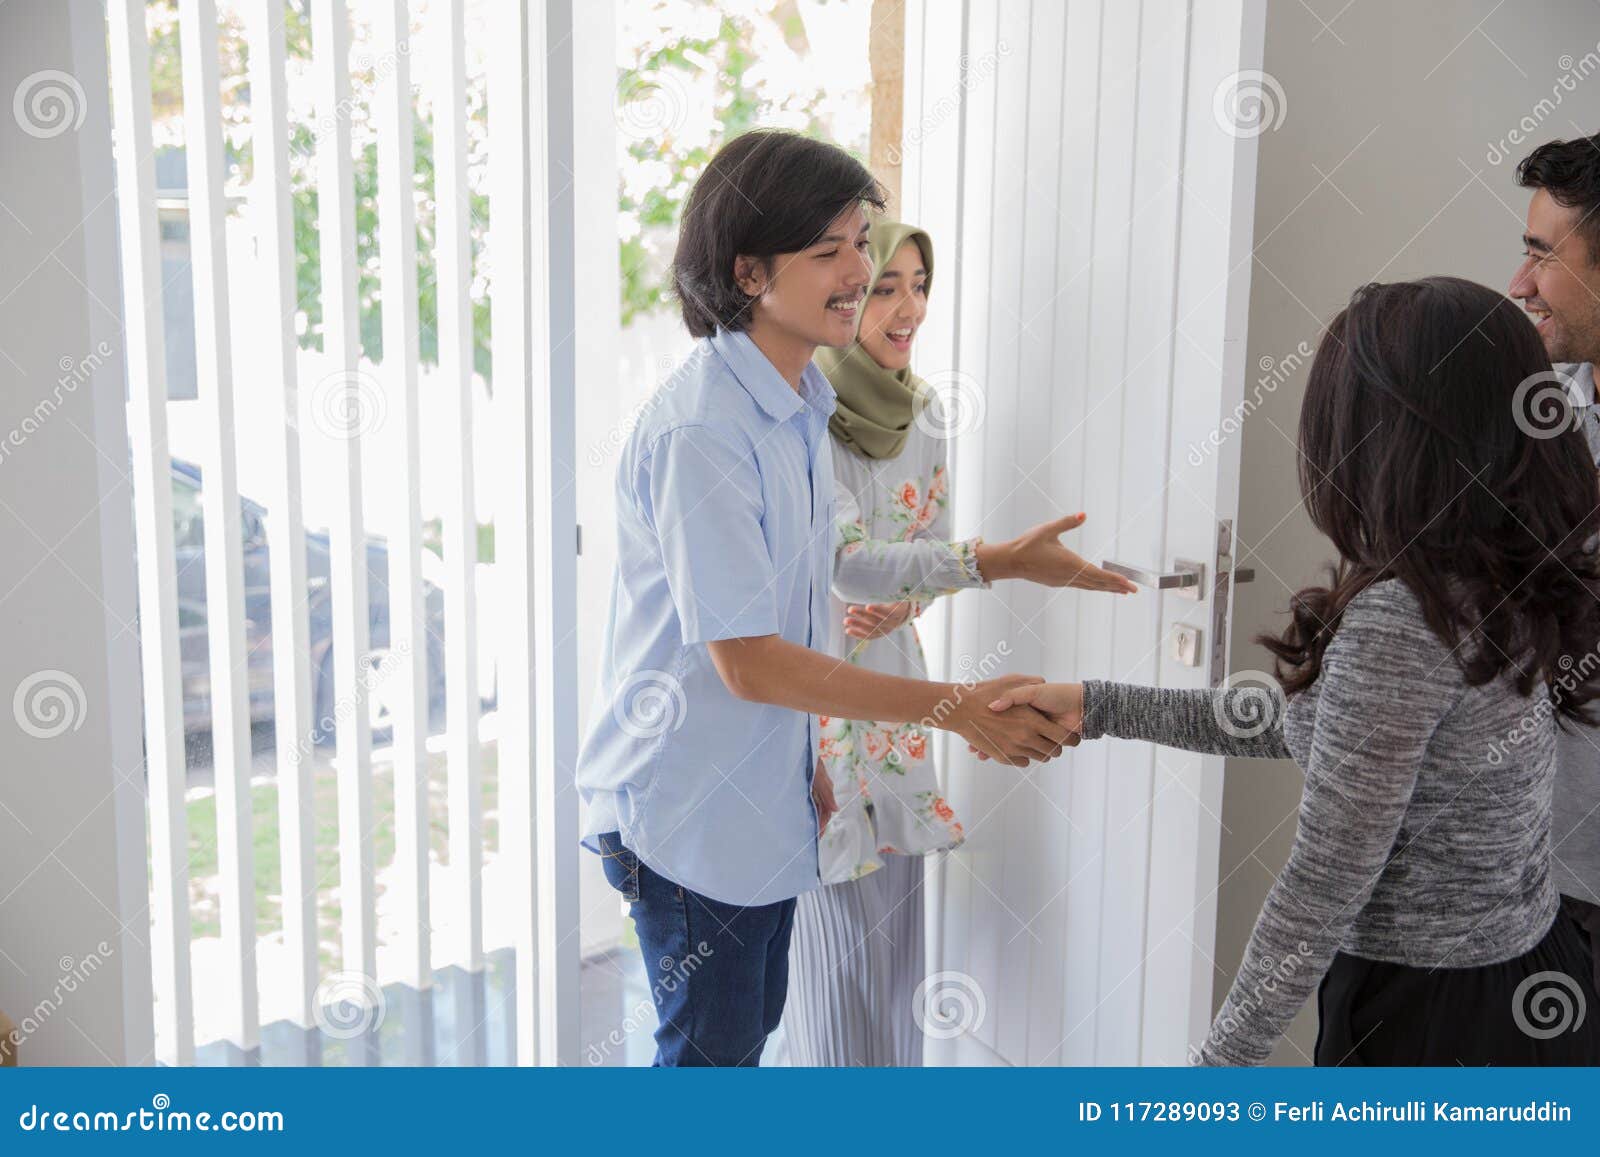 Friend visiting to house stock image. Image of family - 117289093